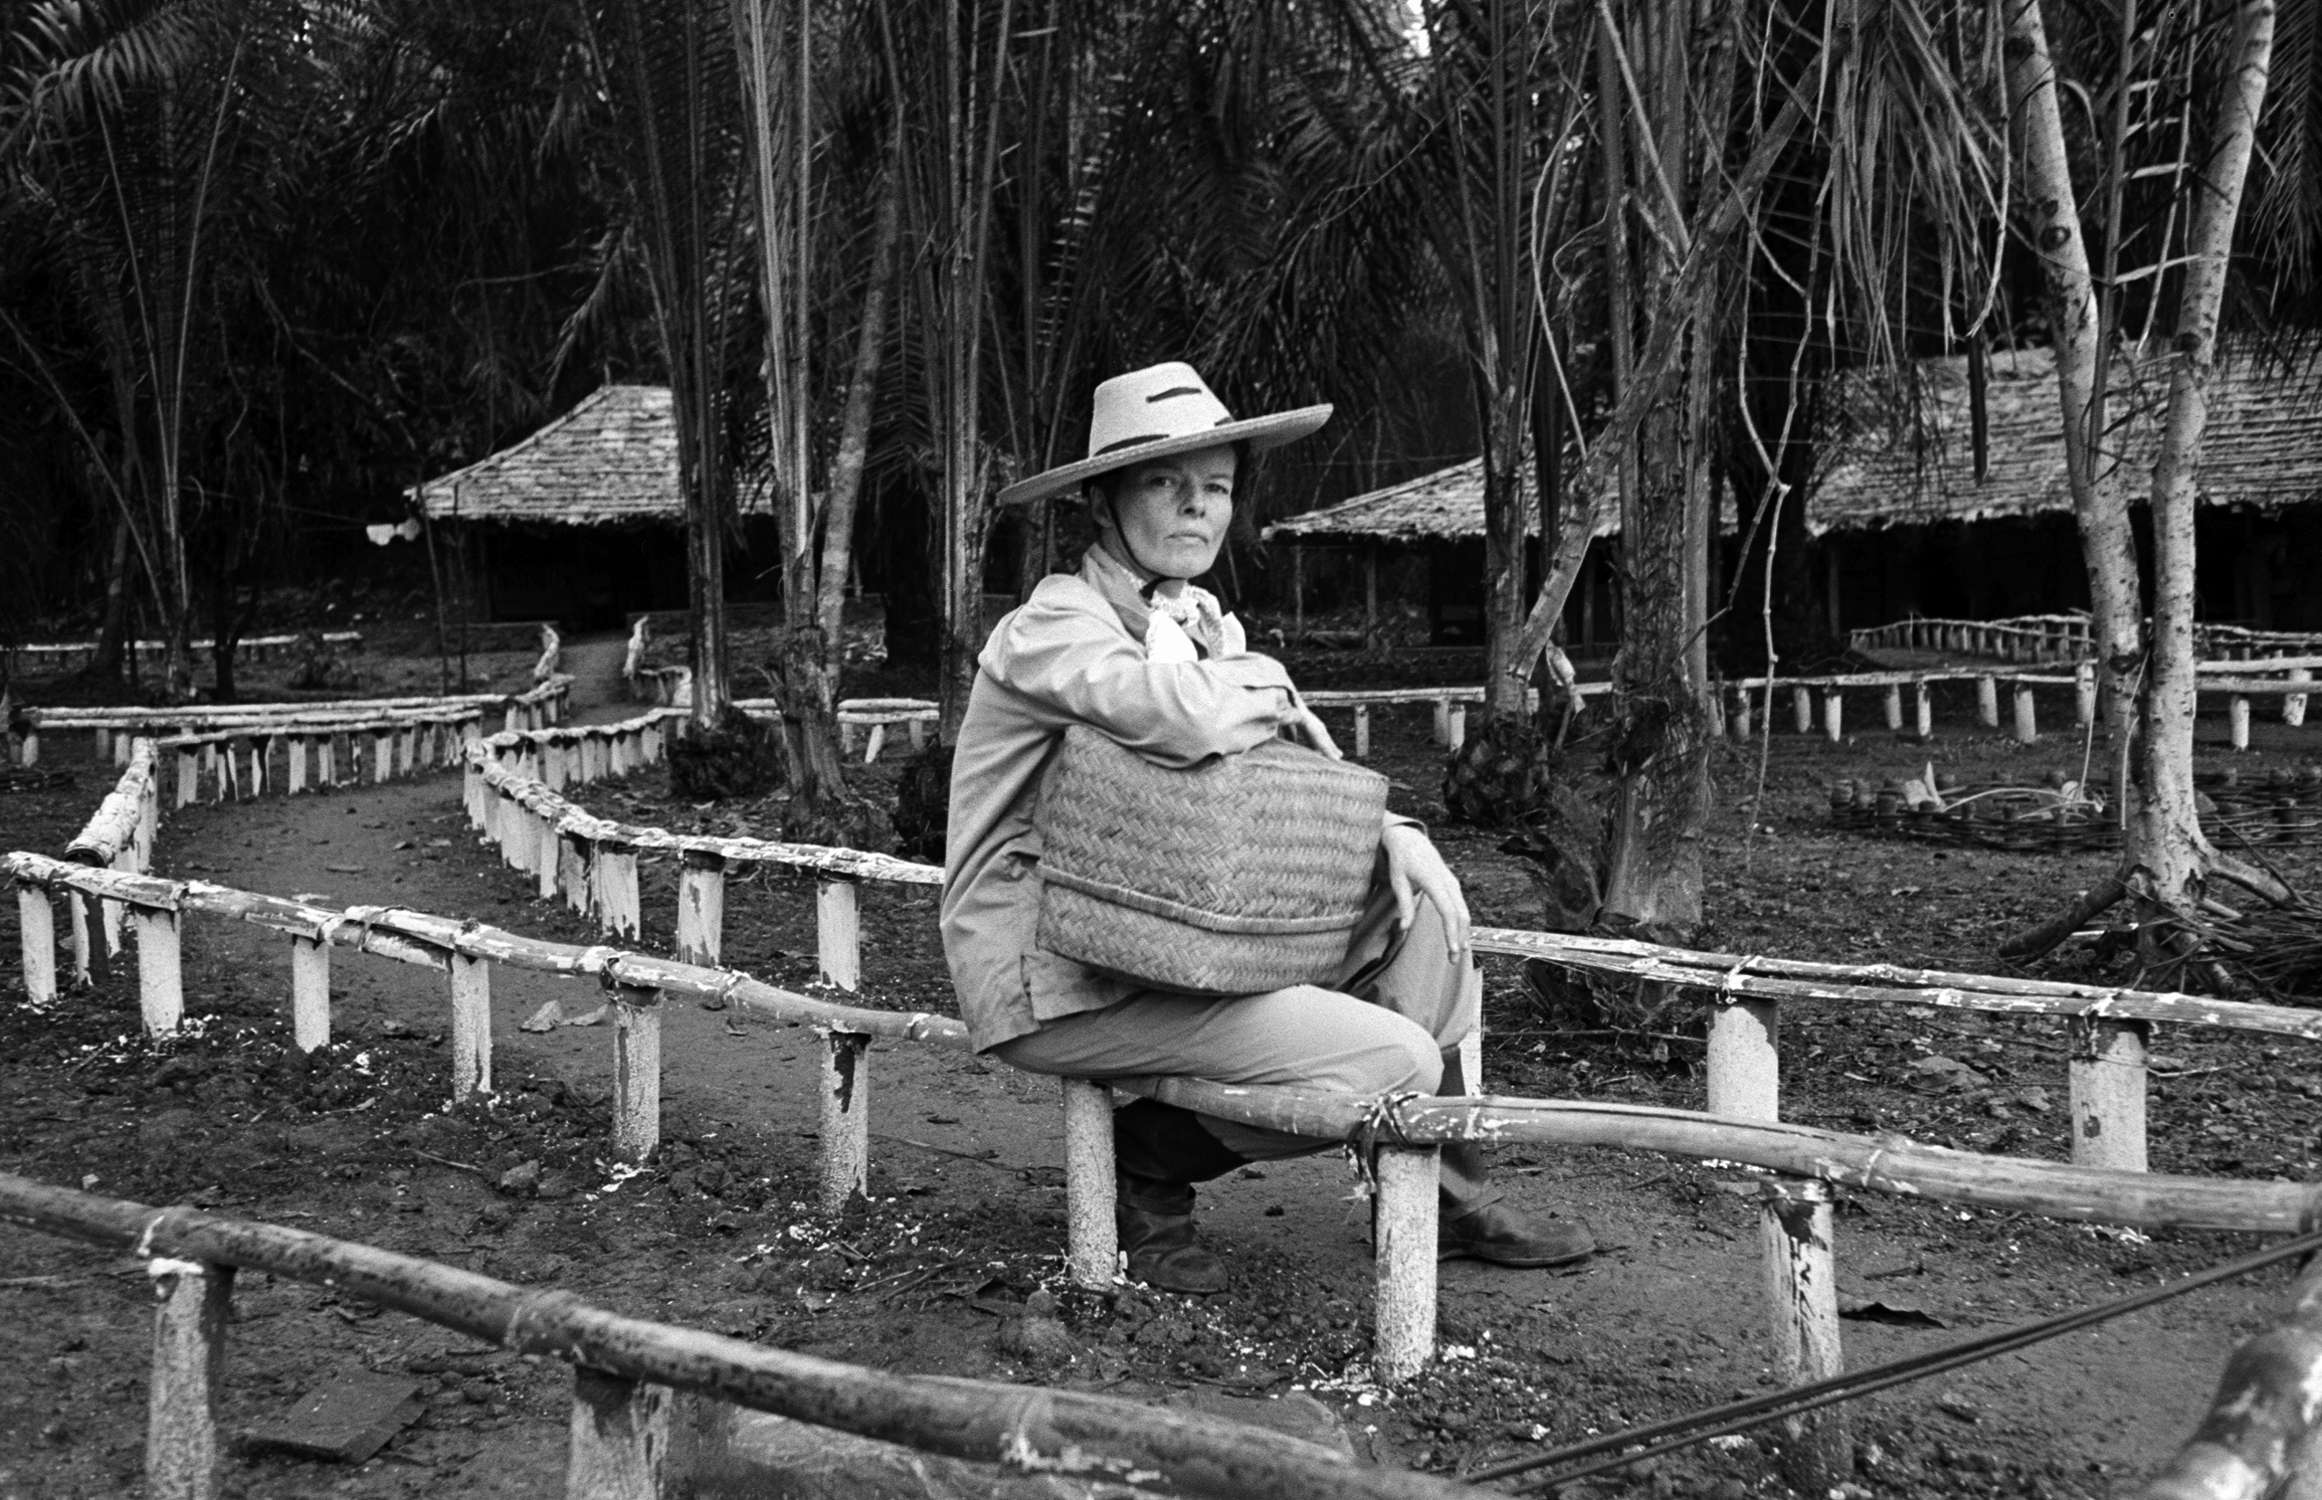 Katharine Hepburn on location in Africa for the filming of The African Queen, 1951.